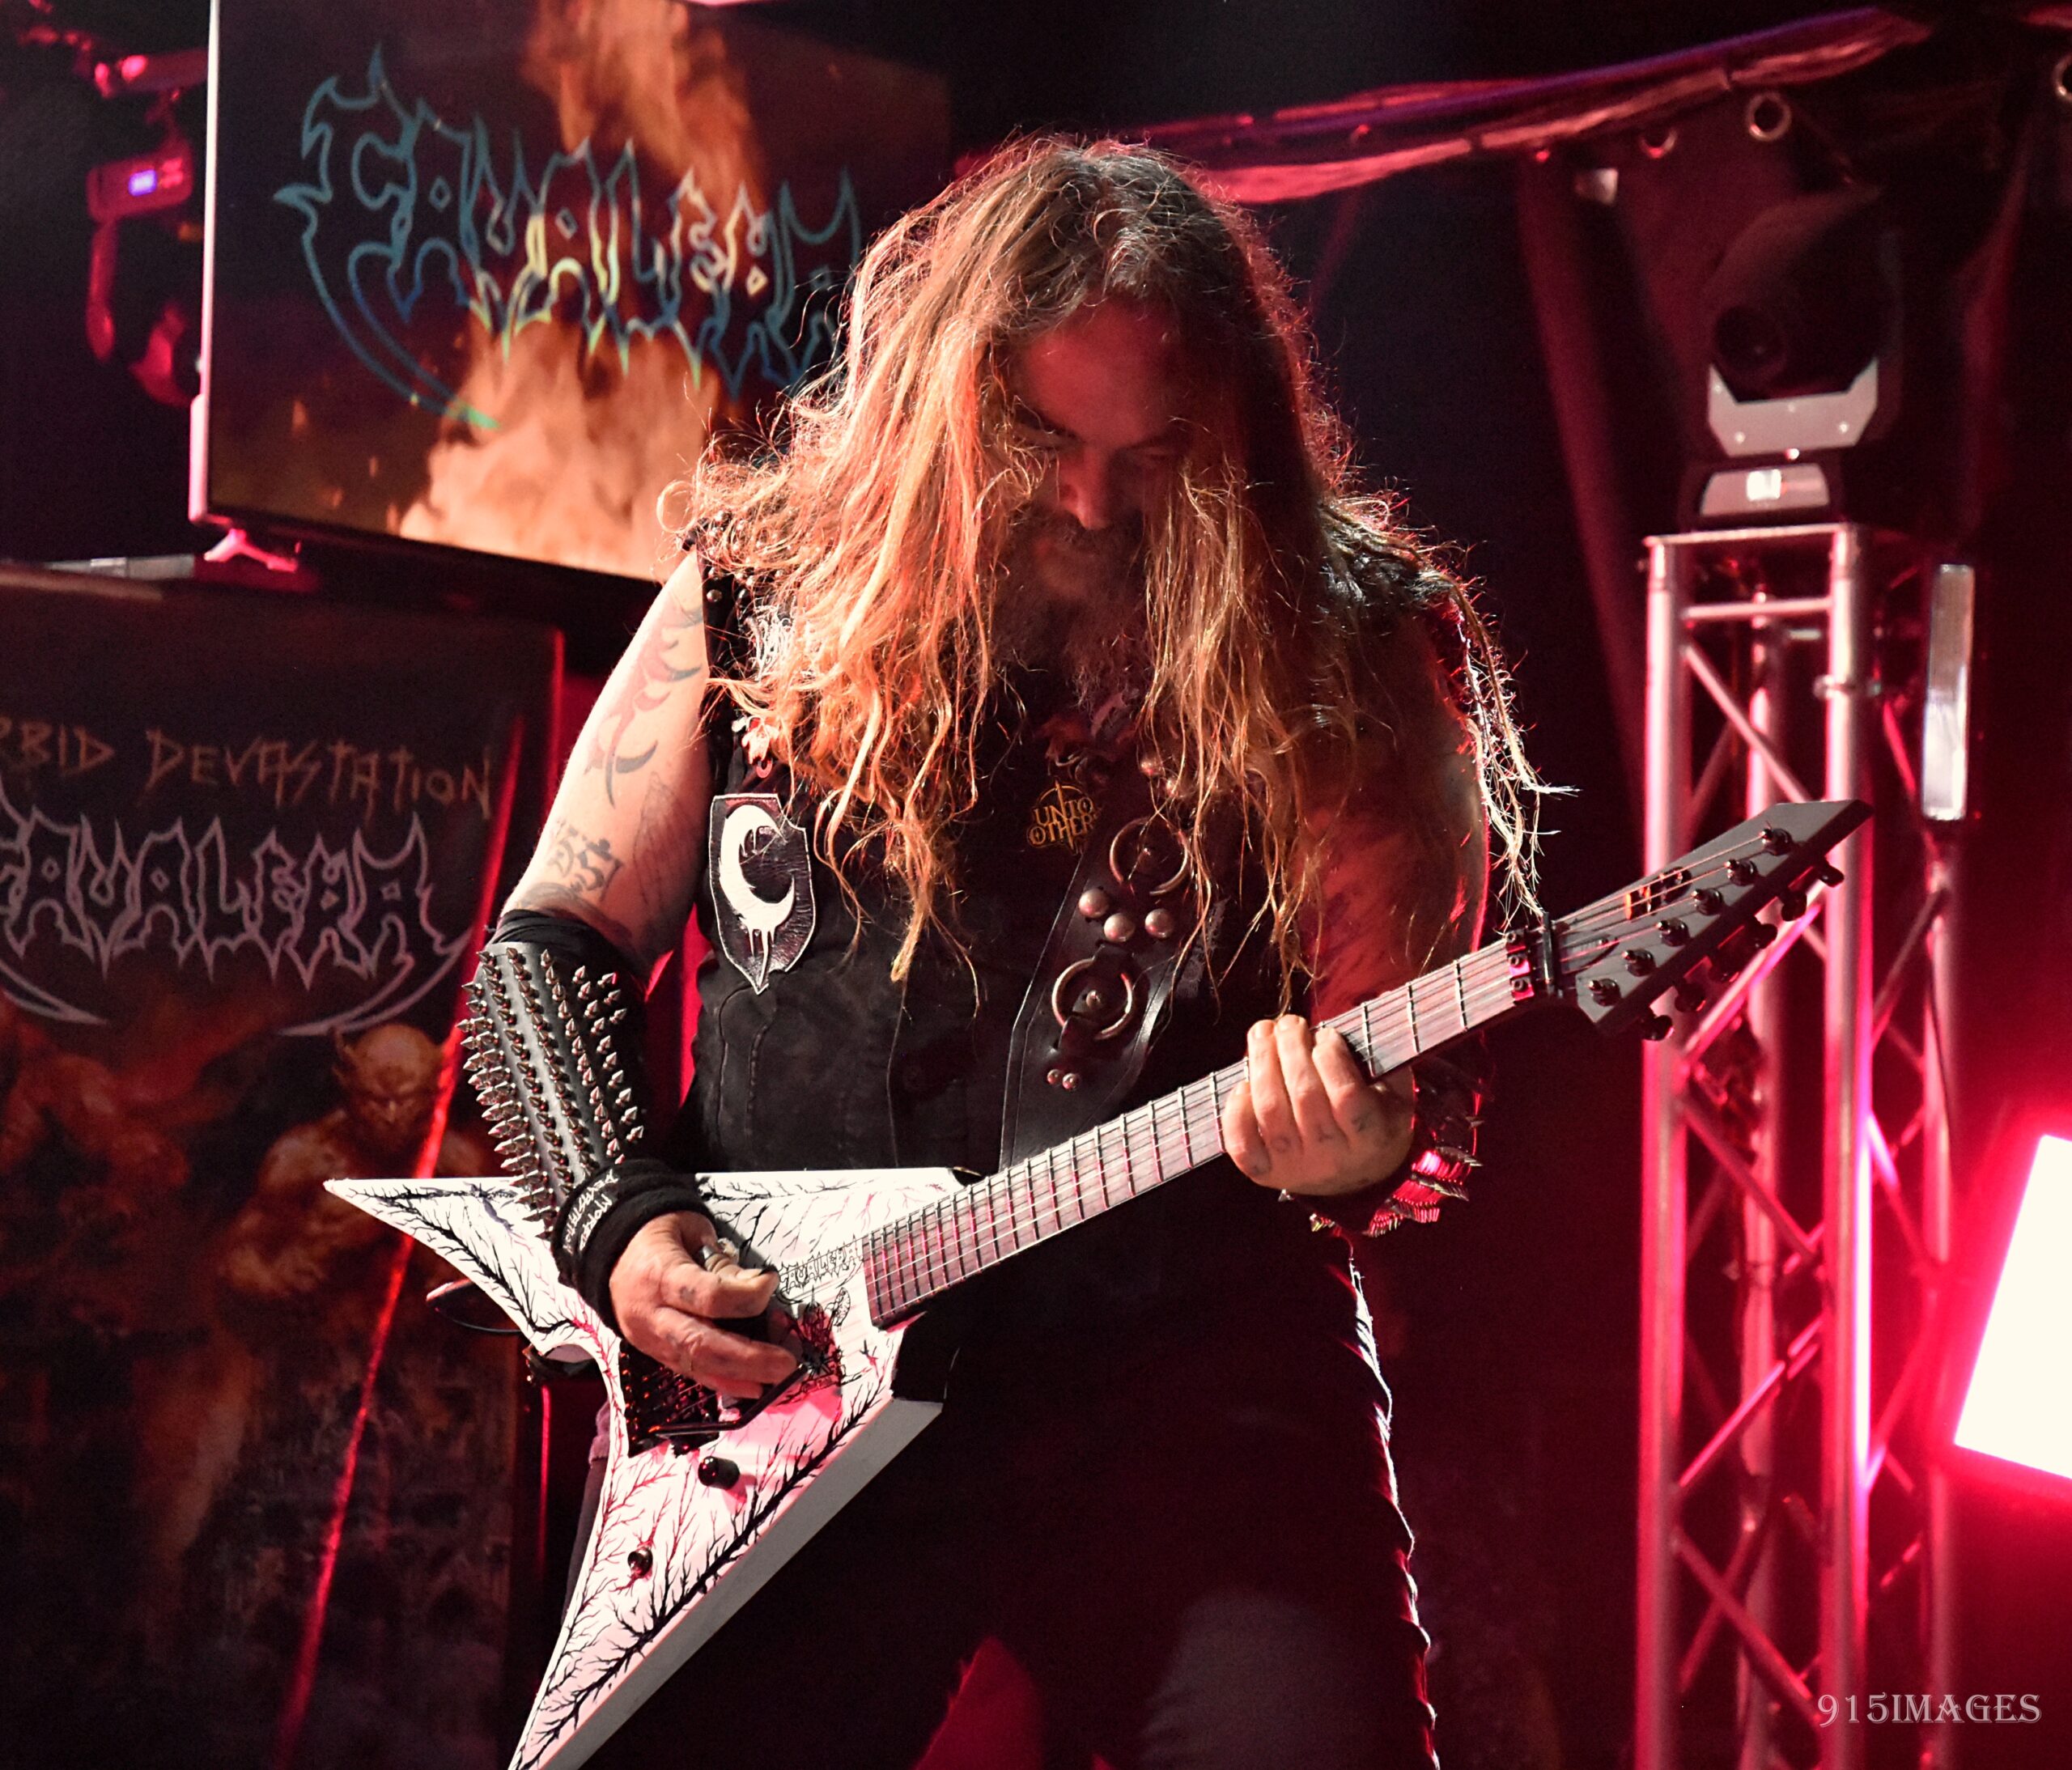 Show Review: Cavalera Conspiracy w/Exhumed, Incite, Thrown Into